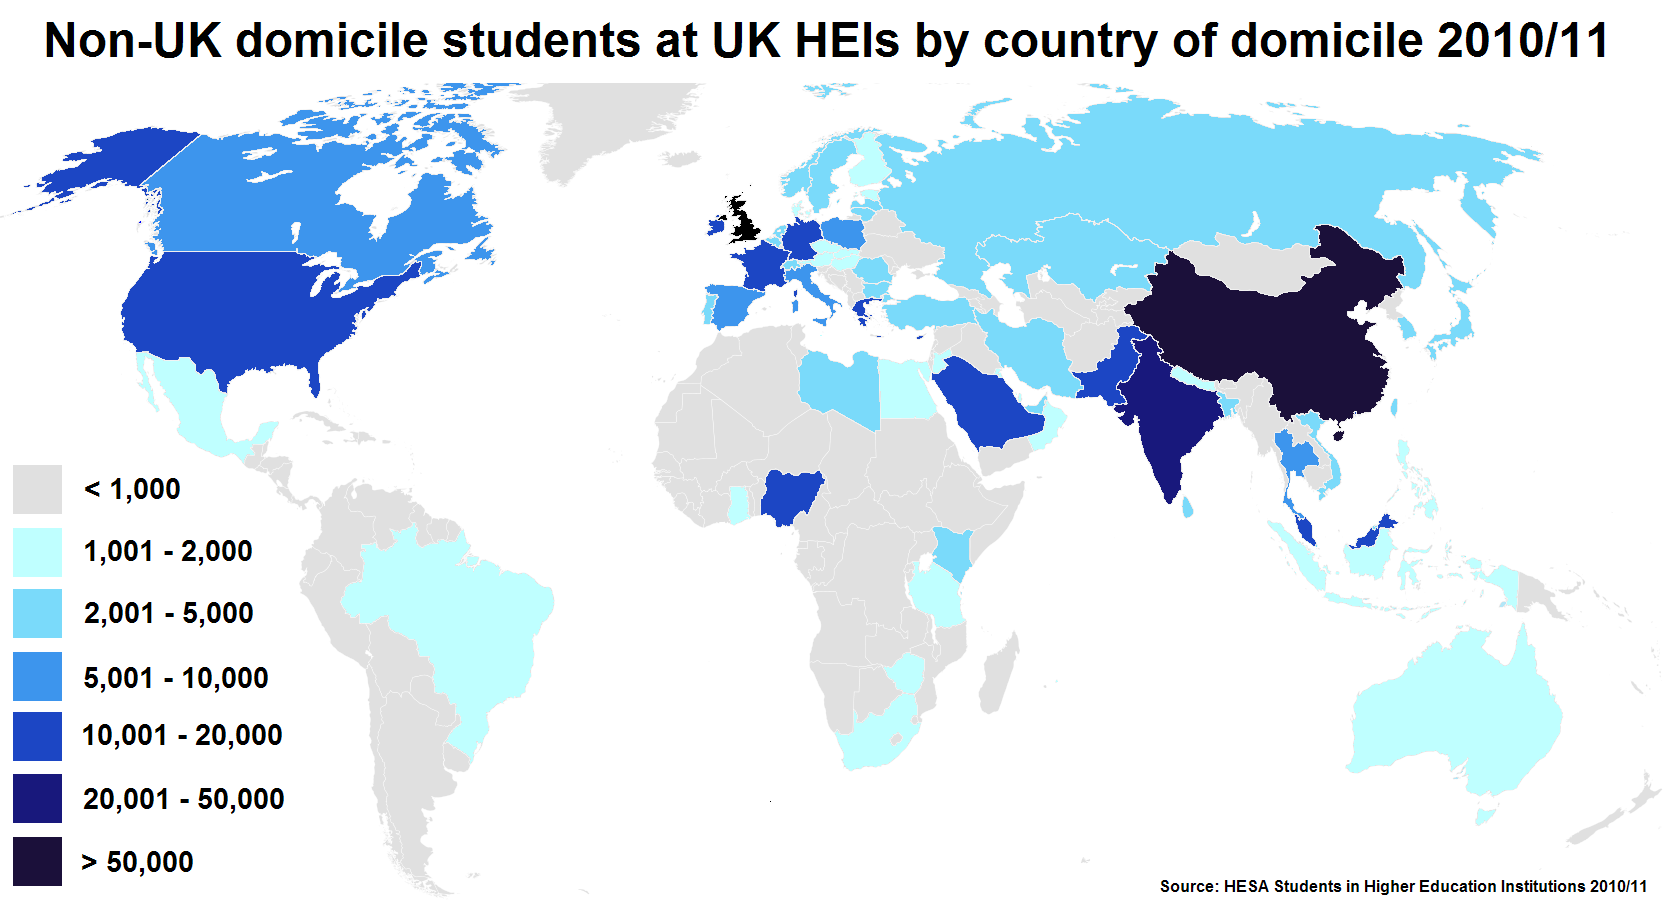 Non-UK domicile students at UK HEIs by country of domicile